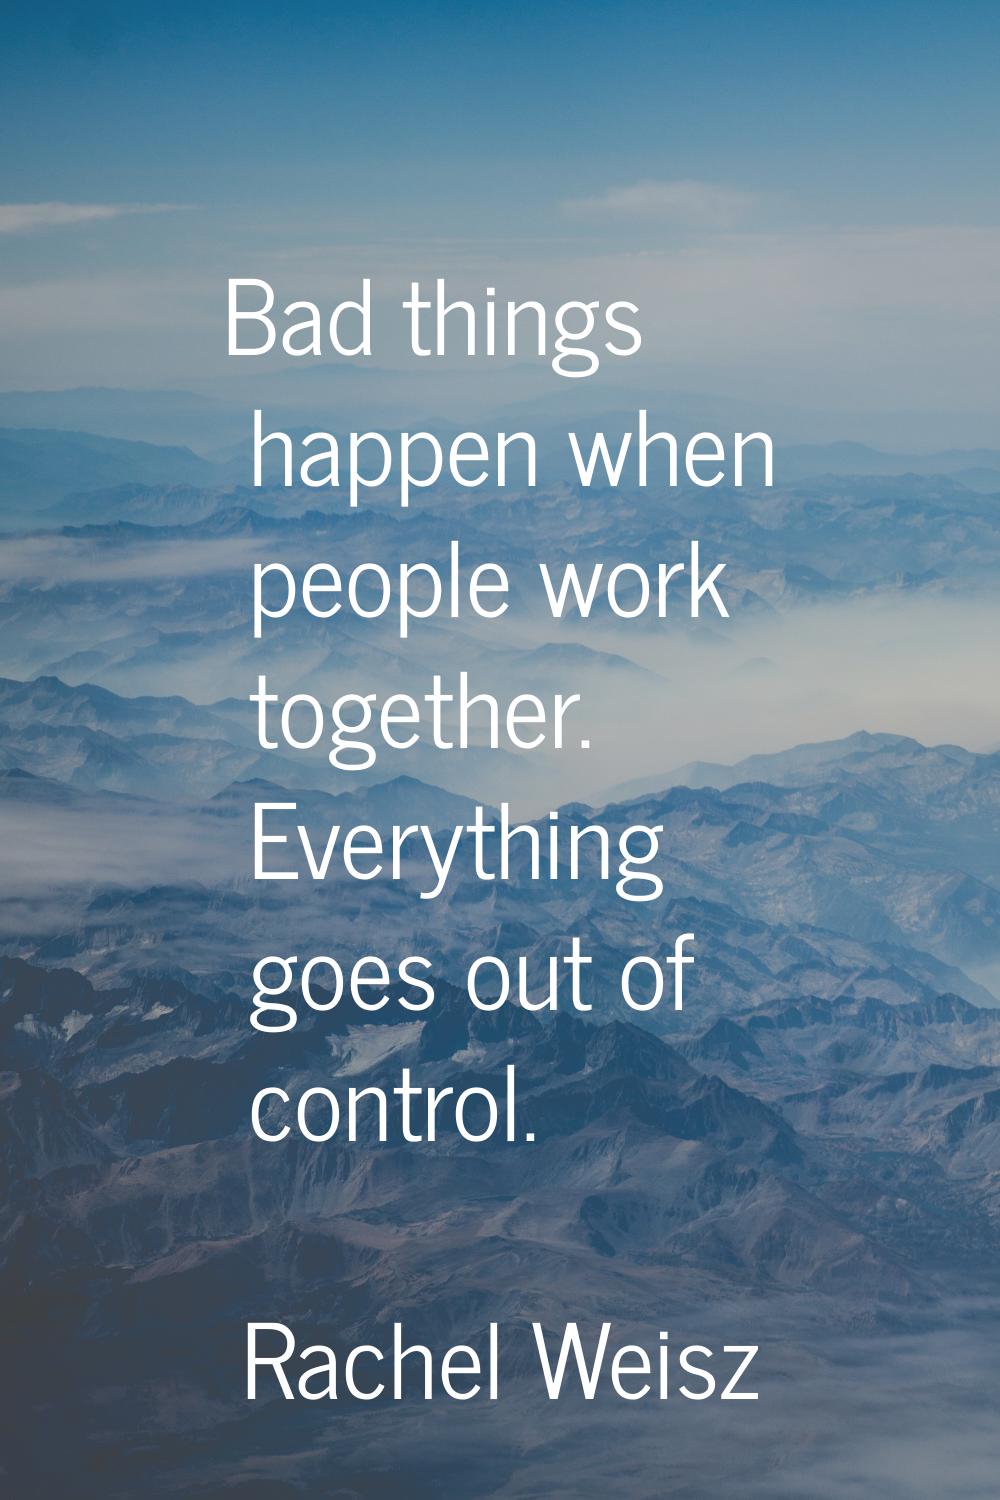 Bad things happen when people work together. Everything goes out of control.